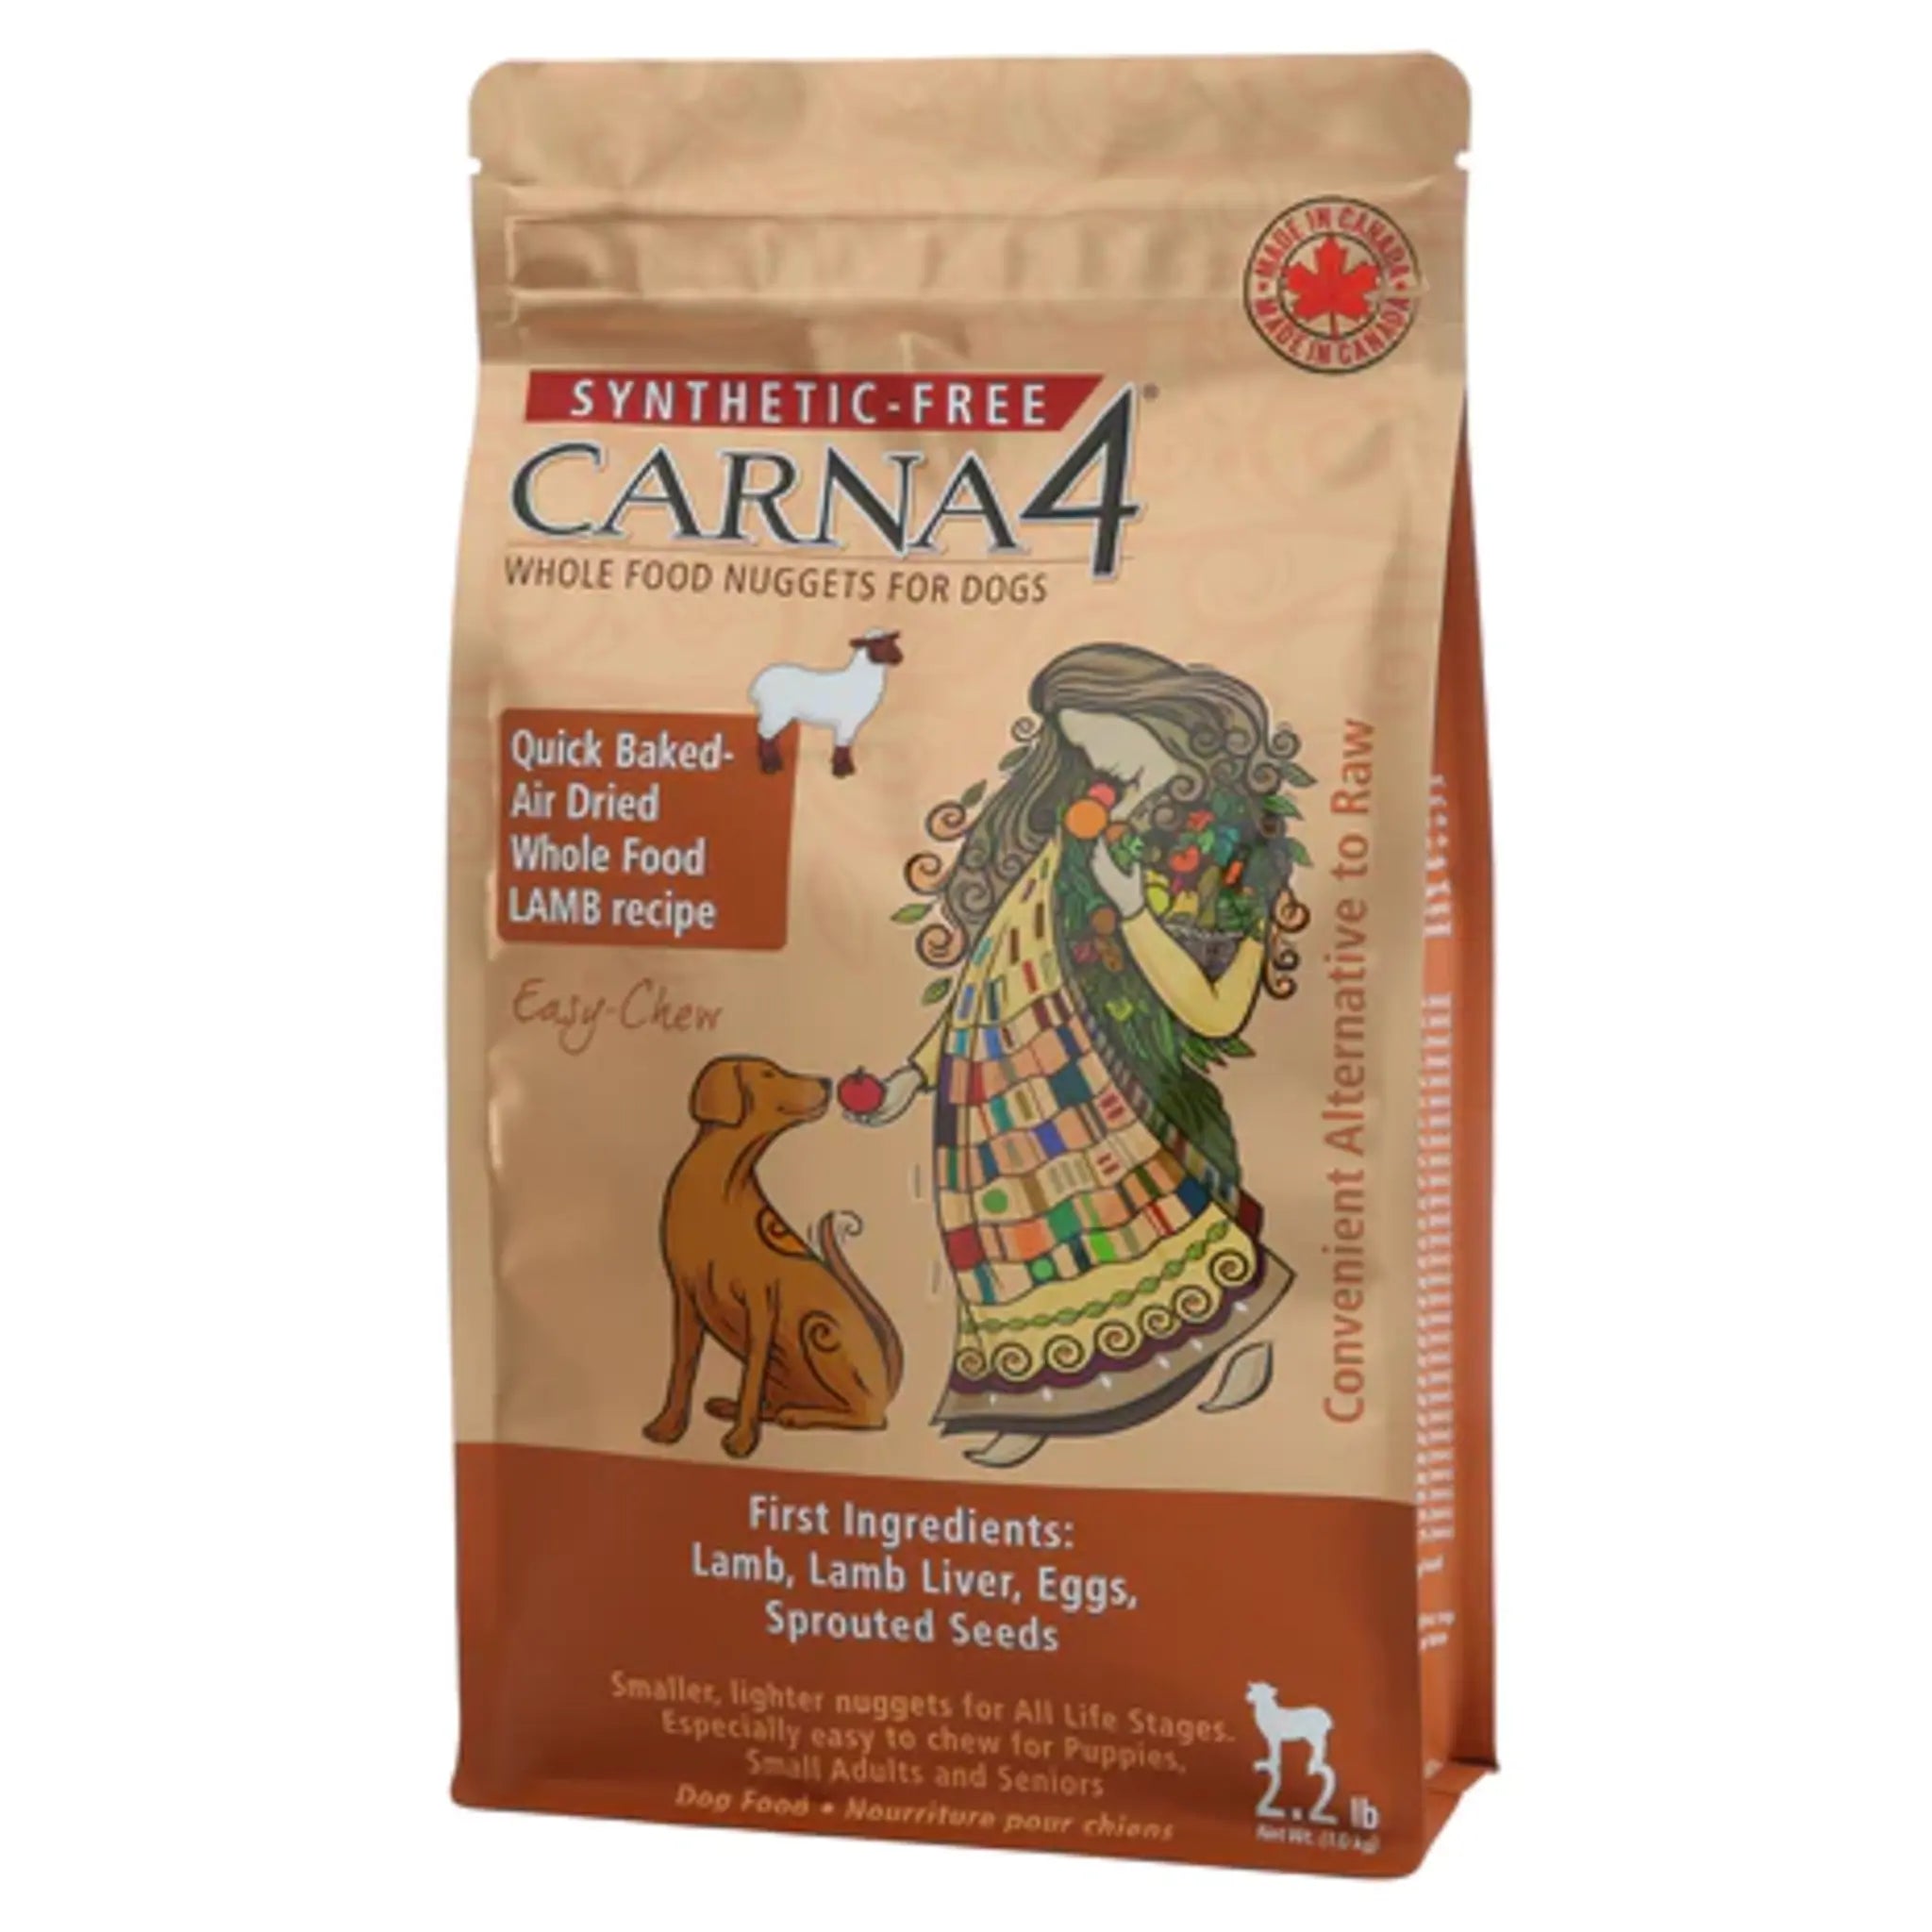 A bag of Carna4 Whole Food Nuggets Dog Food, Easy-Chew Lamb Recipe, Synthetic-Free, Made in Canada, 2.2 lb